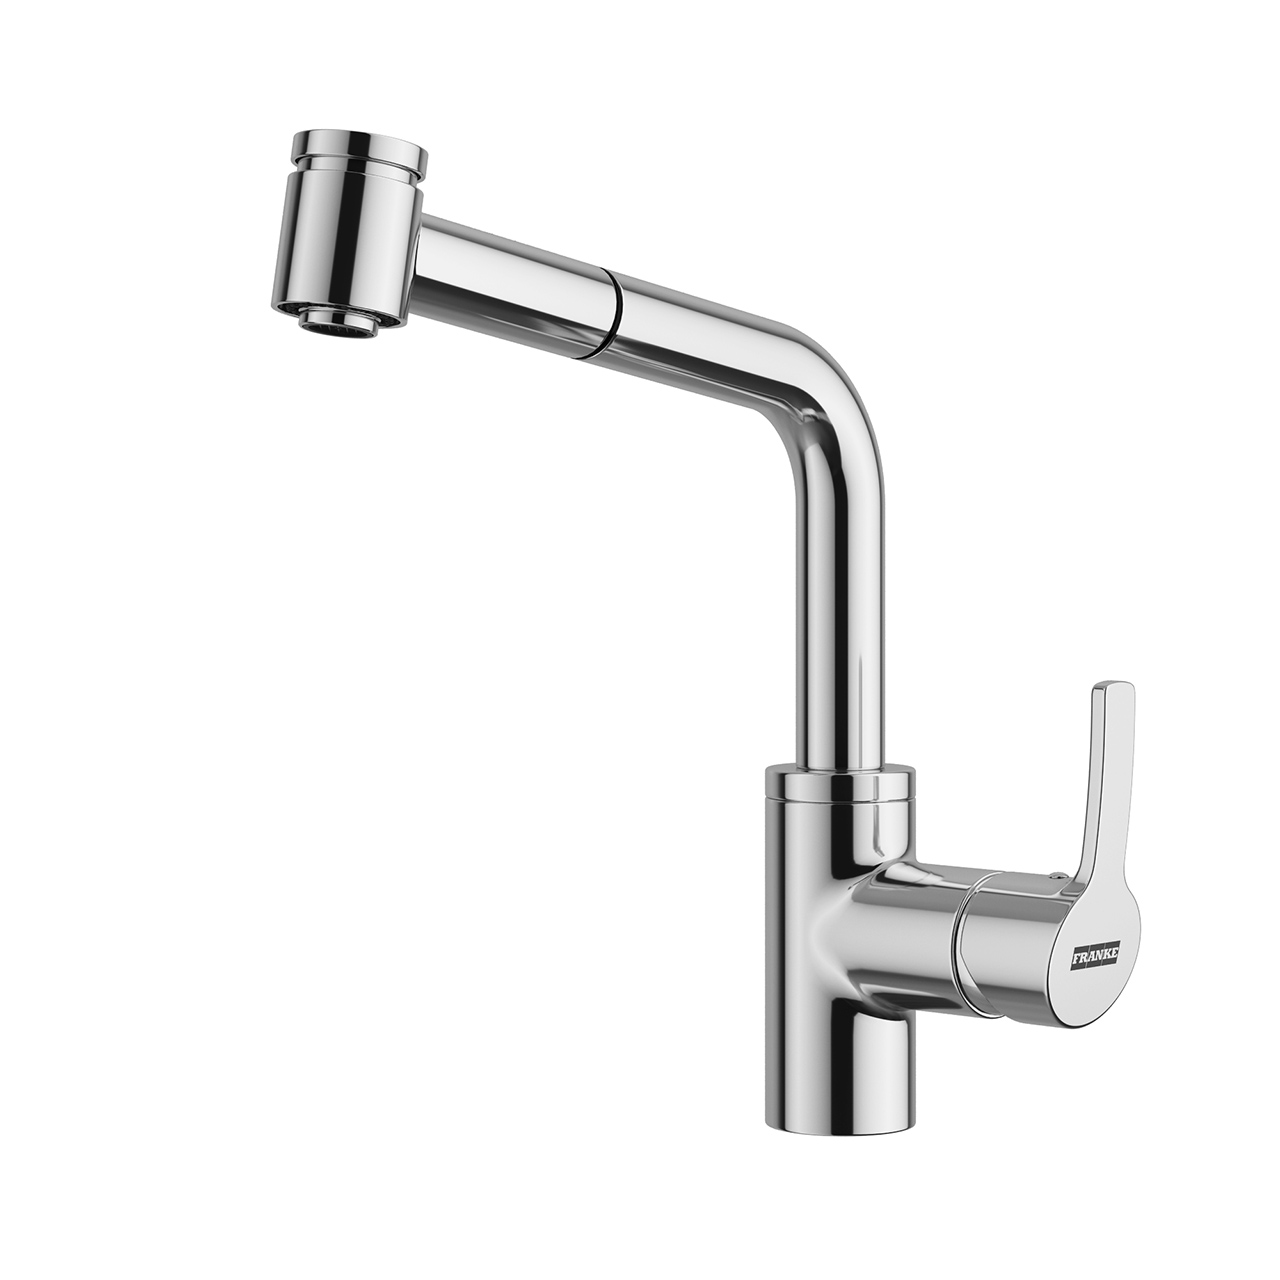 smart-kitchen-tap-pull-out-spray-l-by-franke.jpg